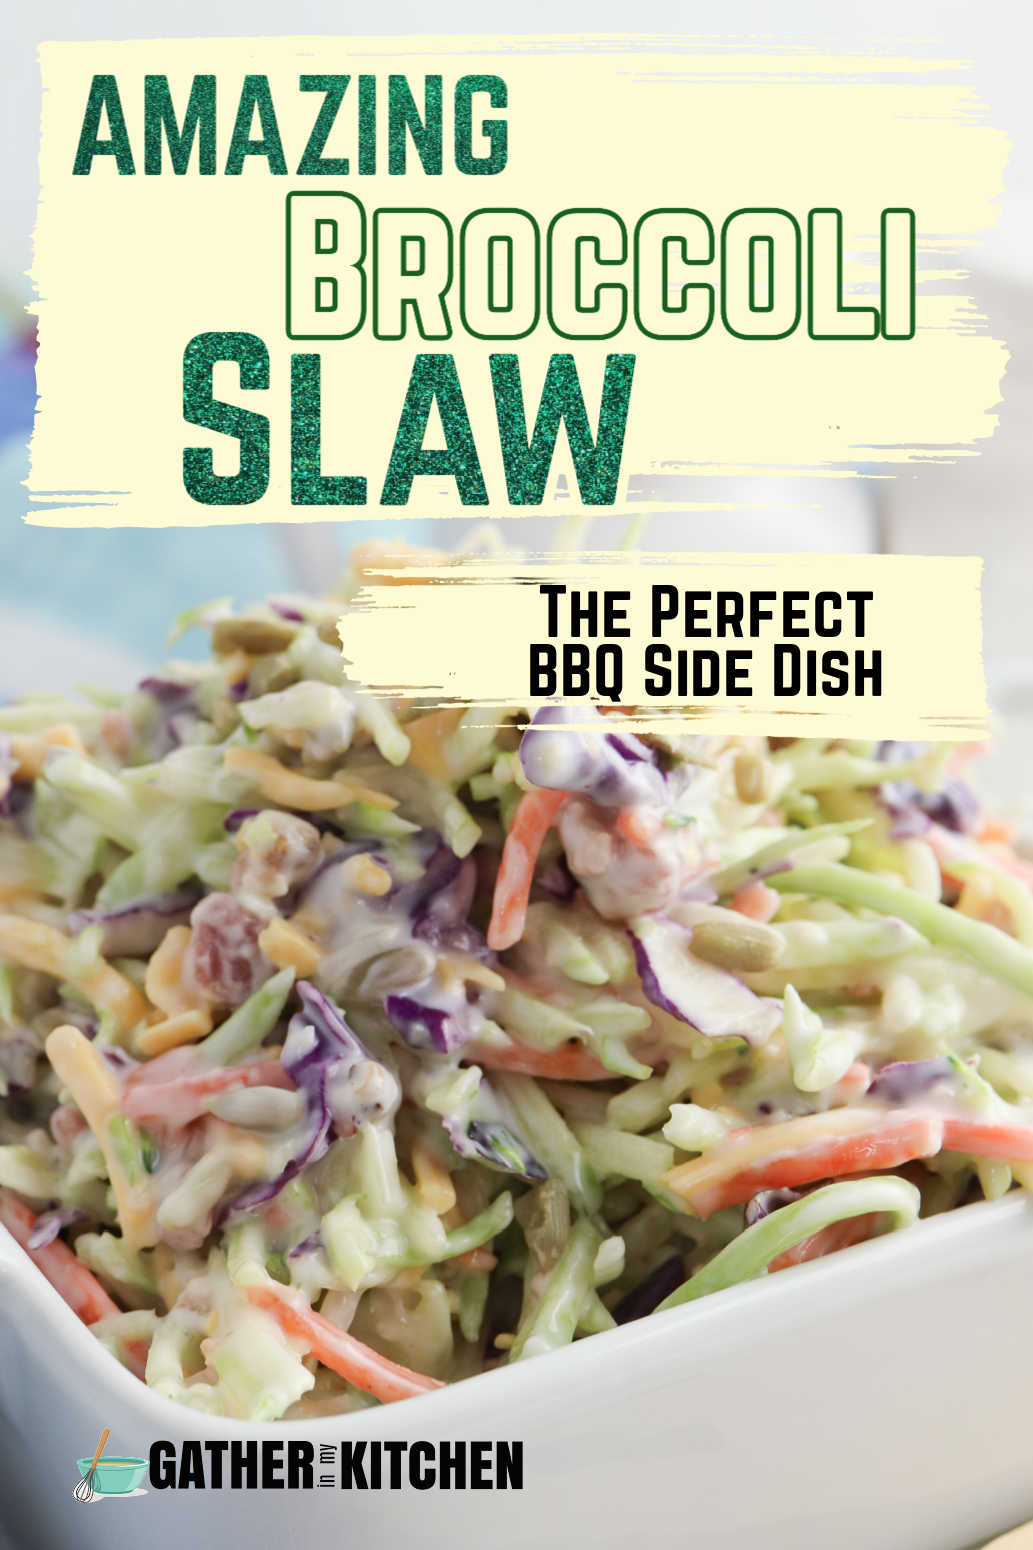 Pin image: top says "Amazing broccoli slaw: The perfect BBQ side dish" and the bottom has a pic of broccoli slaw.